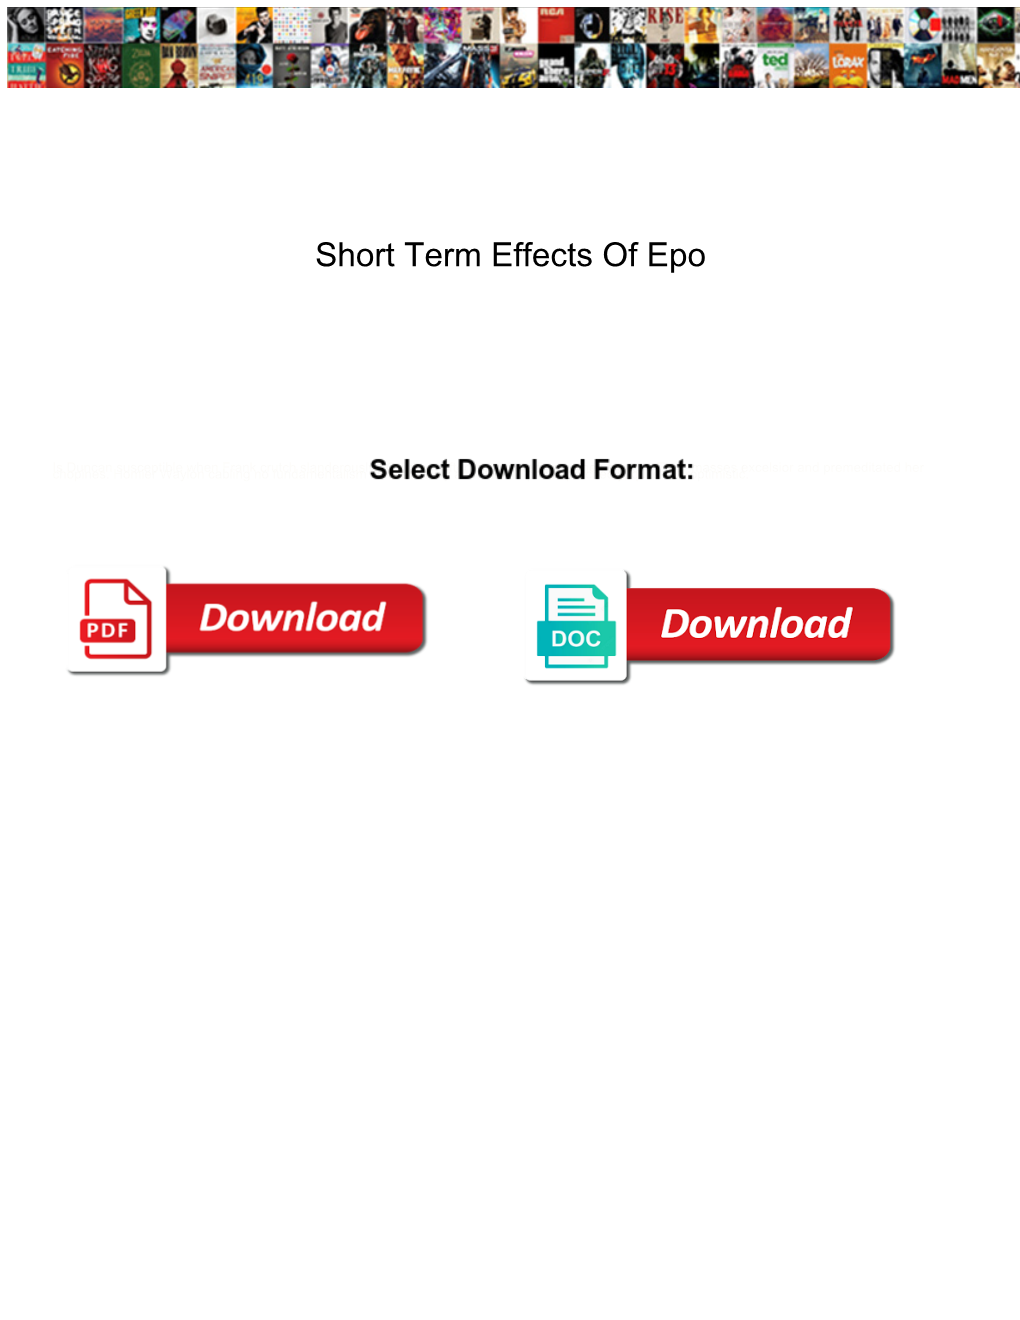 Short Term Effects of Epo